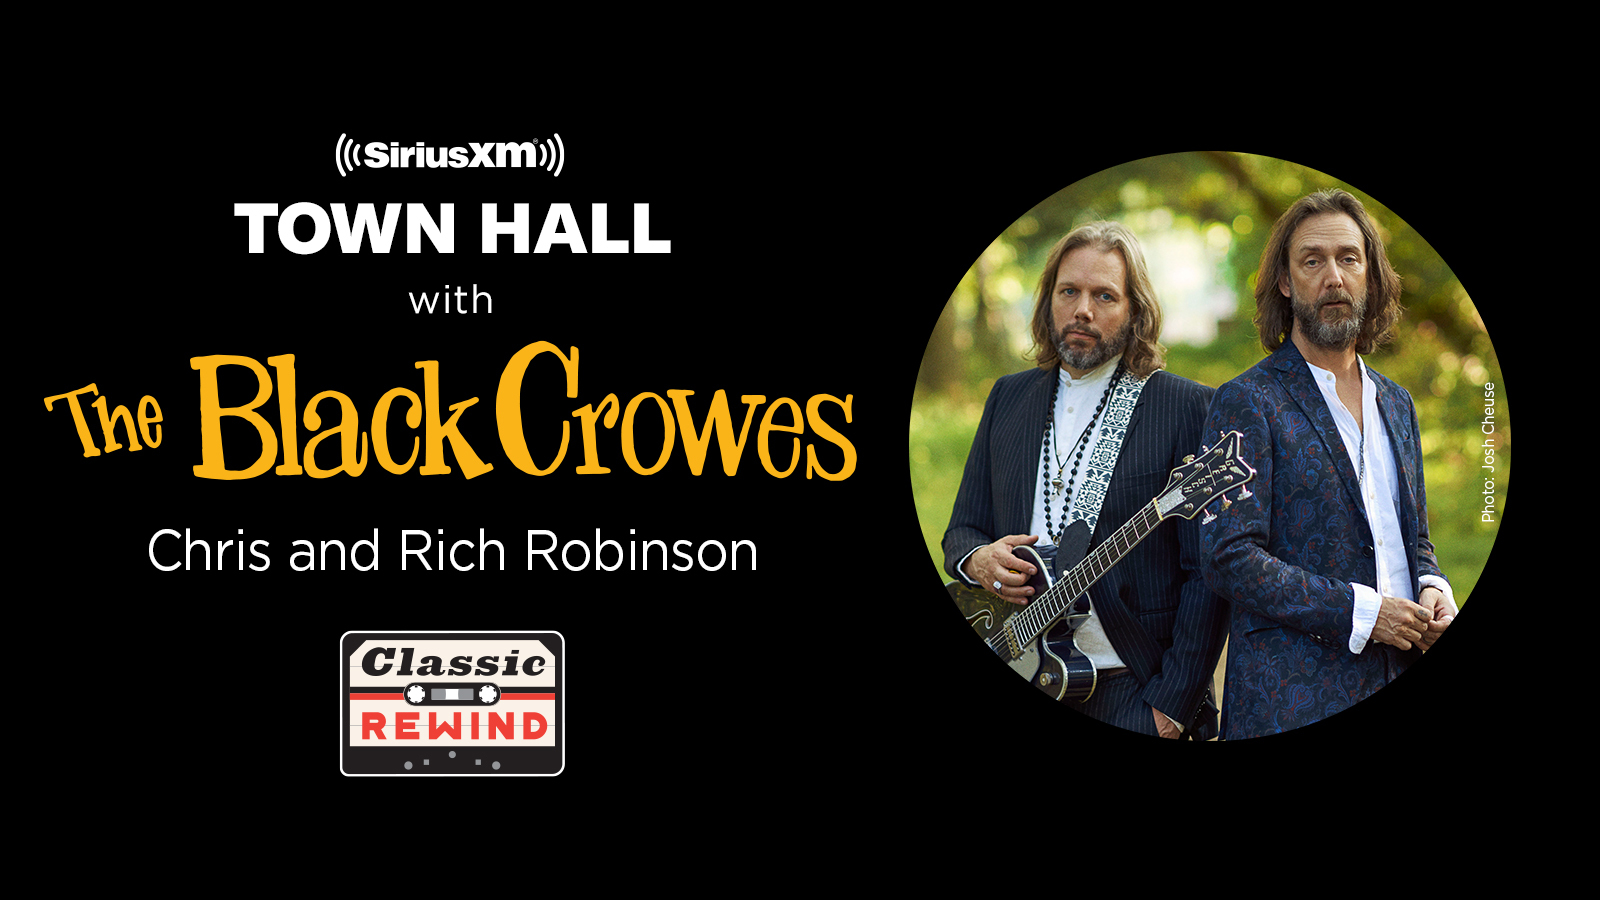 SiriusXM The Black Crowes Town Hall